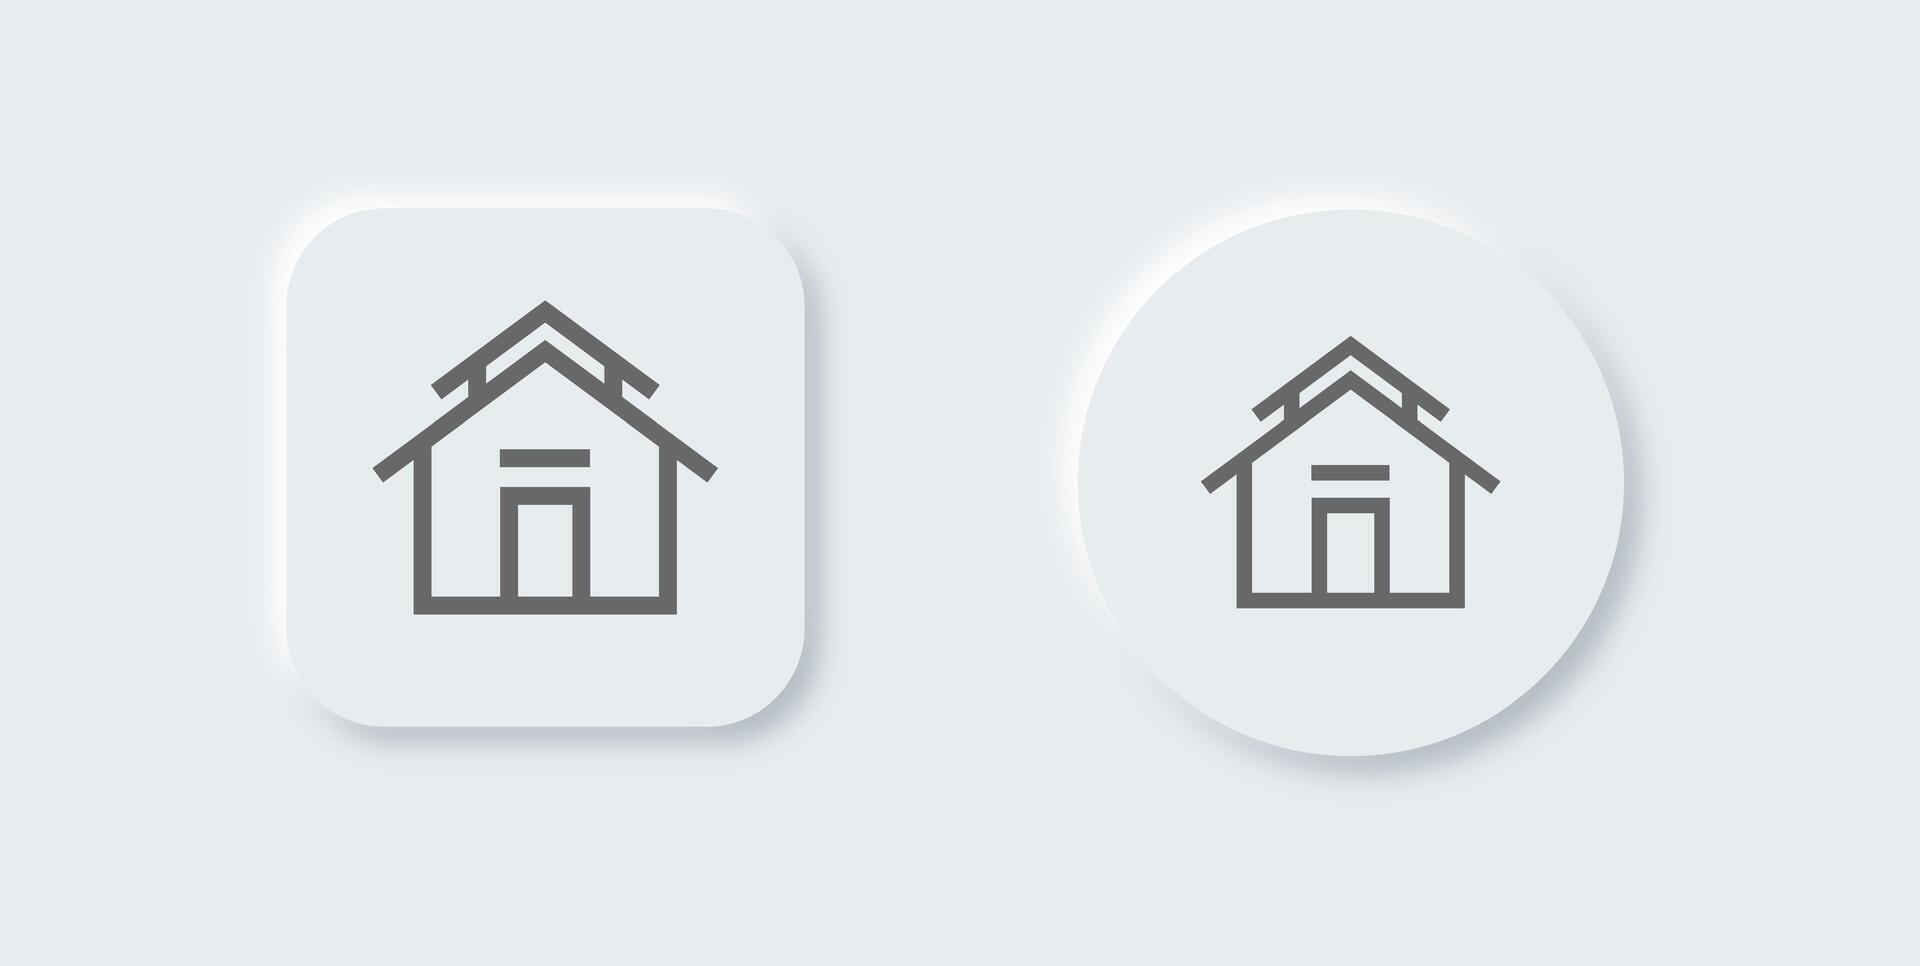 Home button line icon in neomorphic design style. House signs vector illustration.